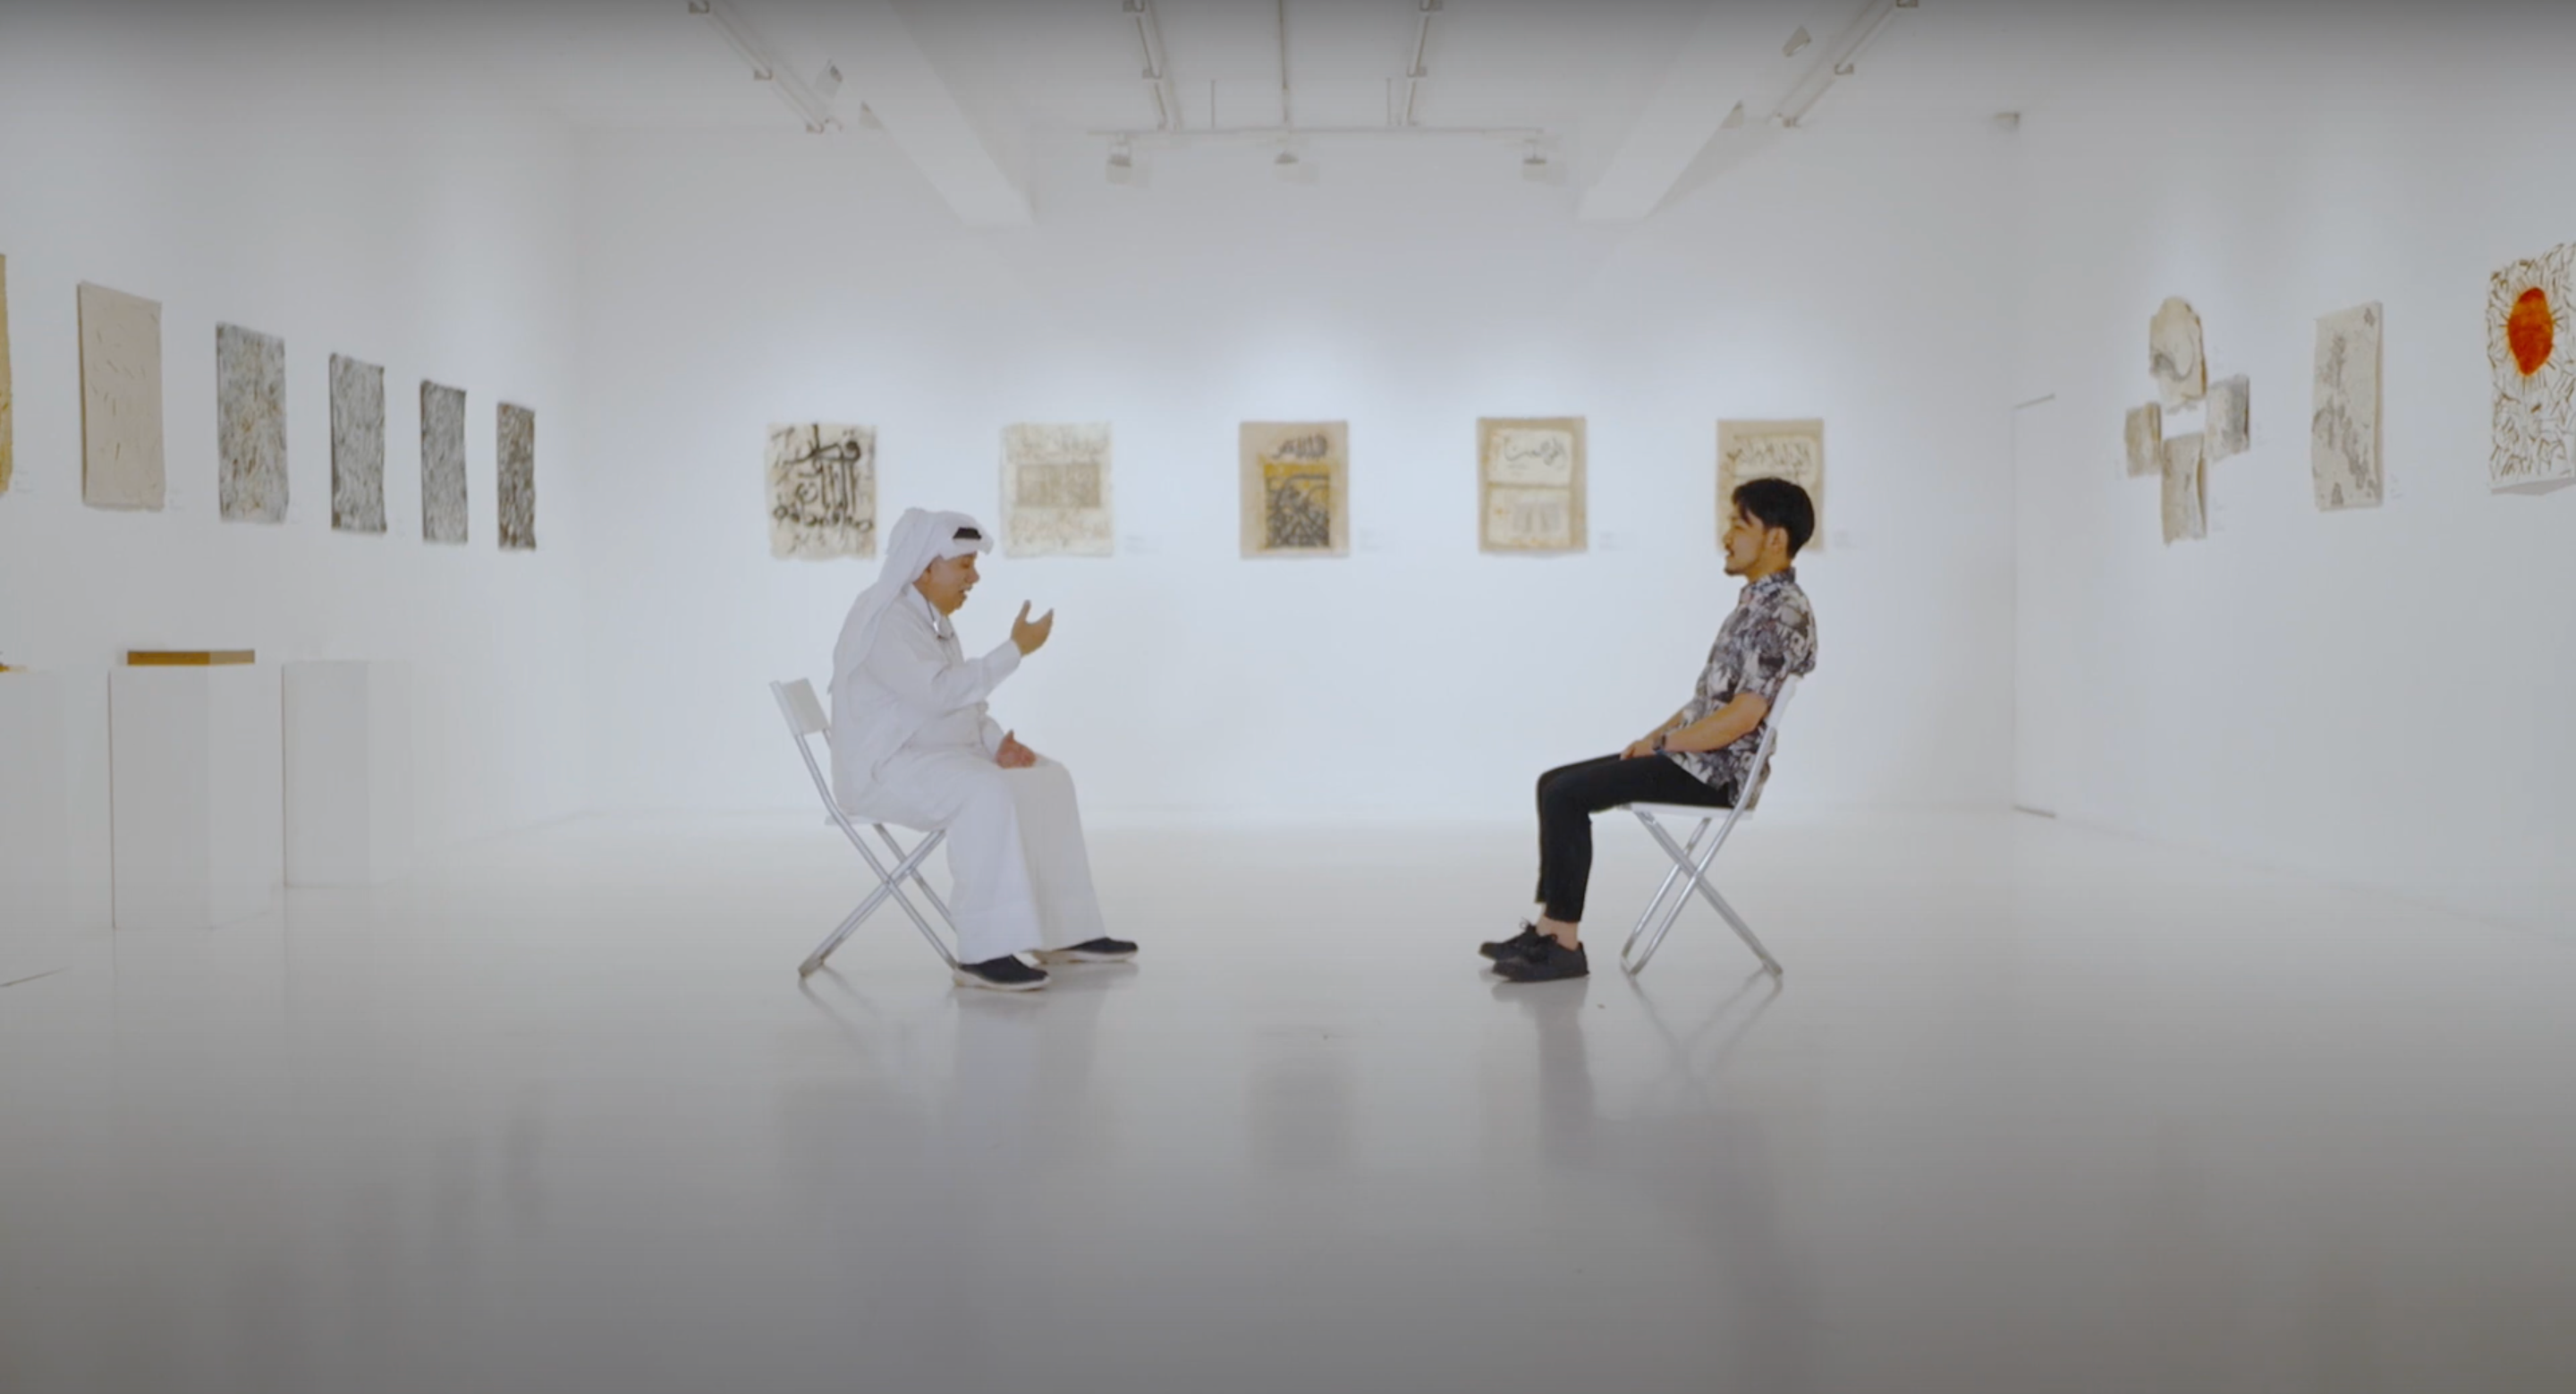 Qatari artist Yousef Ahmad sits on a chair opposite Japanese artist Hayaki Nishigaki in the middle of a white gallery space.